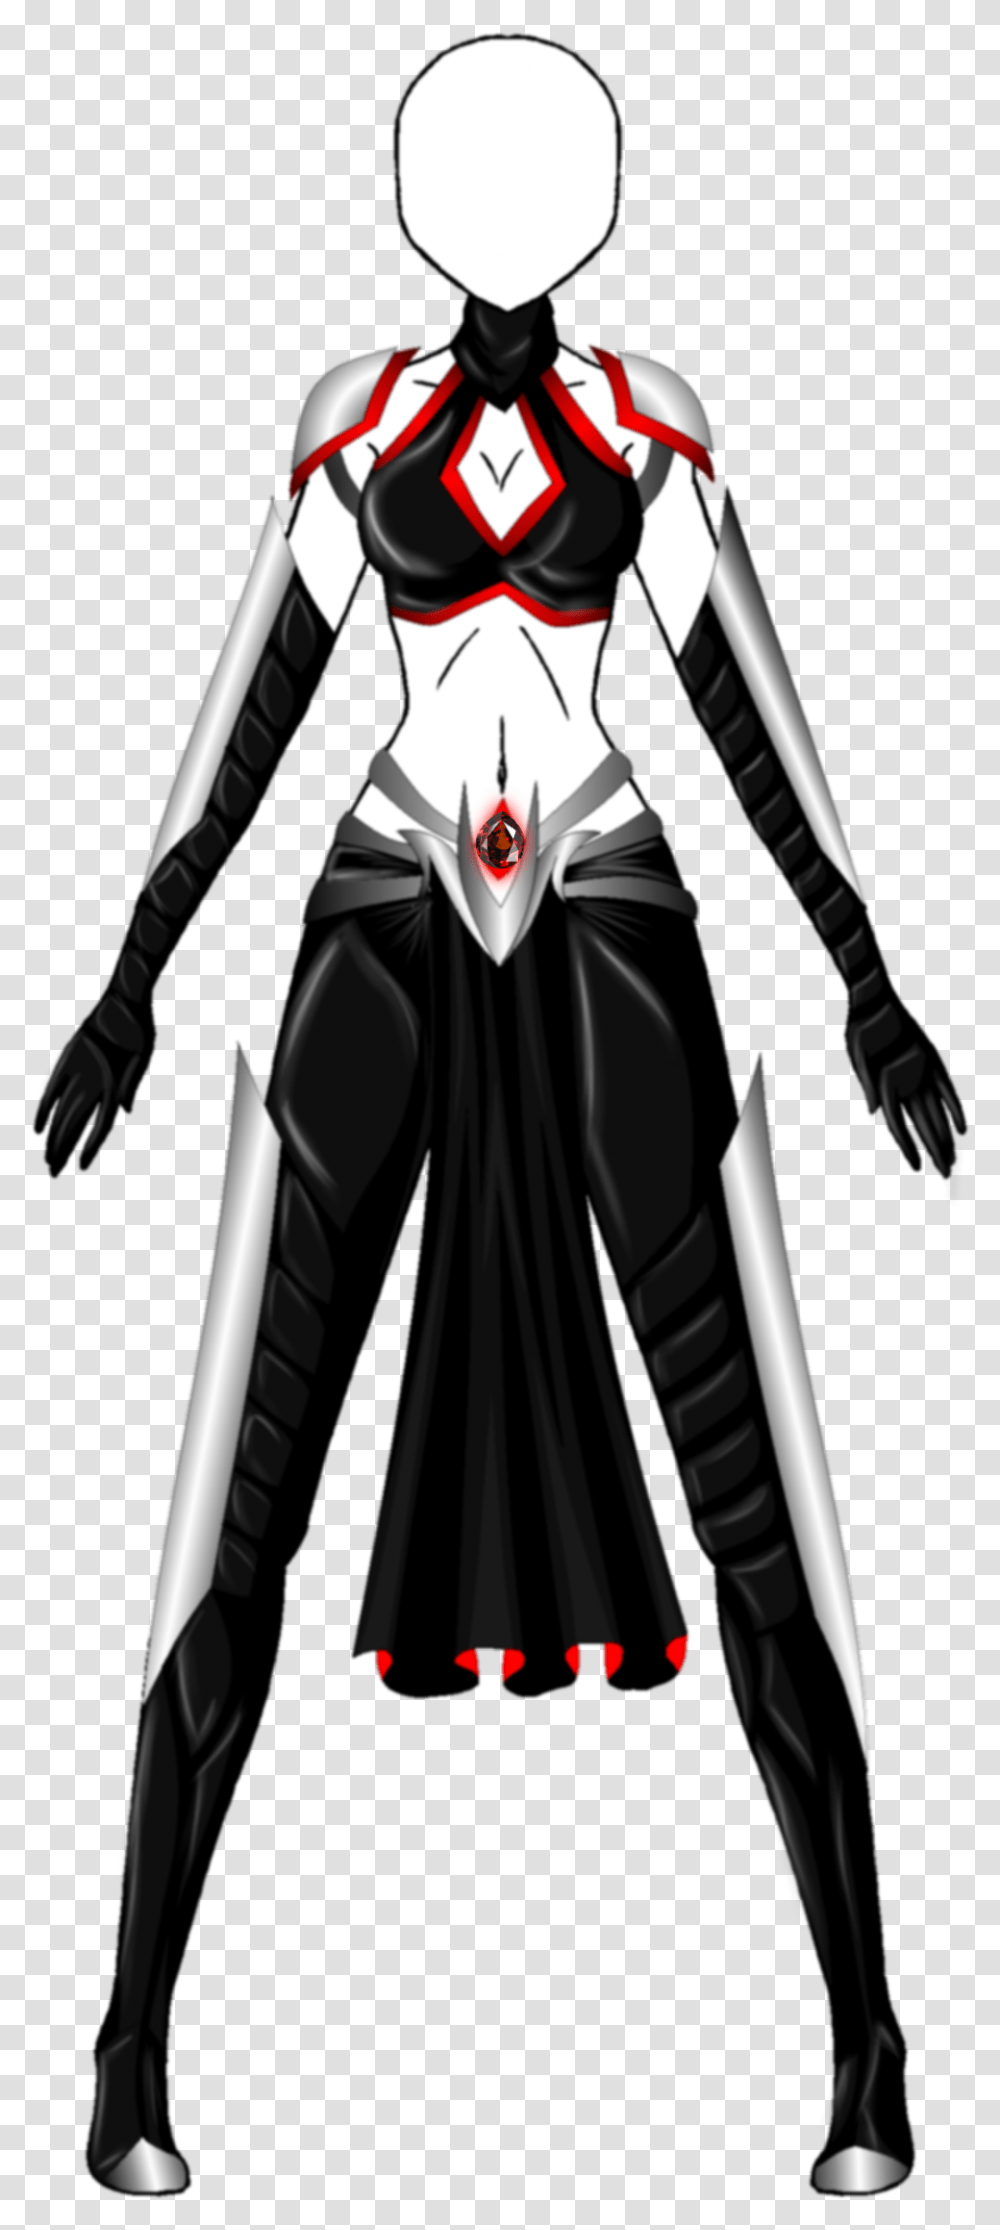 Download Hd Robes Drawing Assassin Assassin Anime Outfits Female, Clothing, Person, Fashion, Cloak Transparent Png